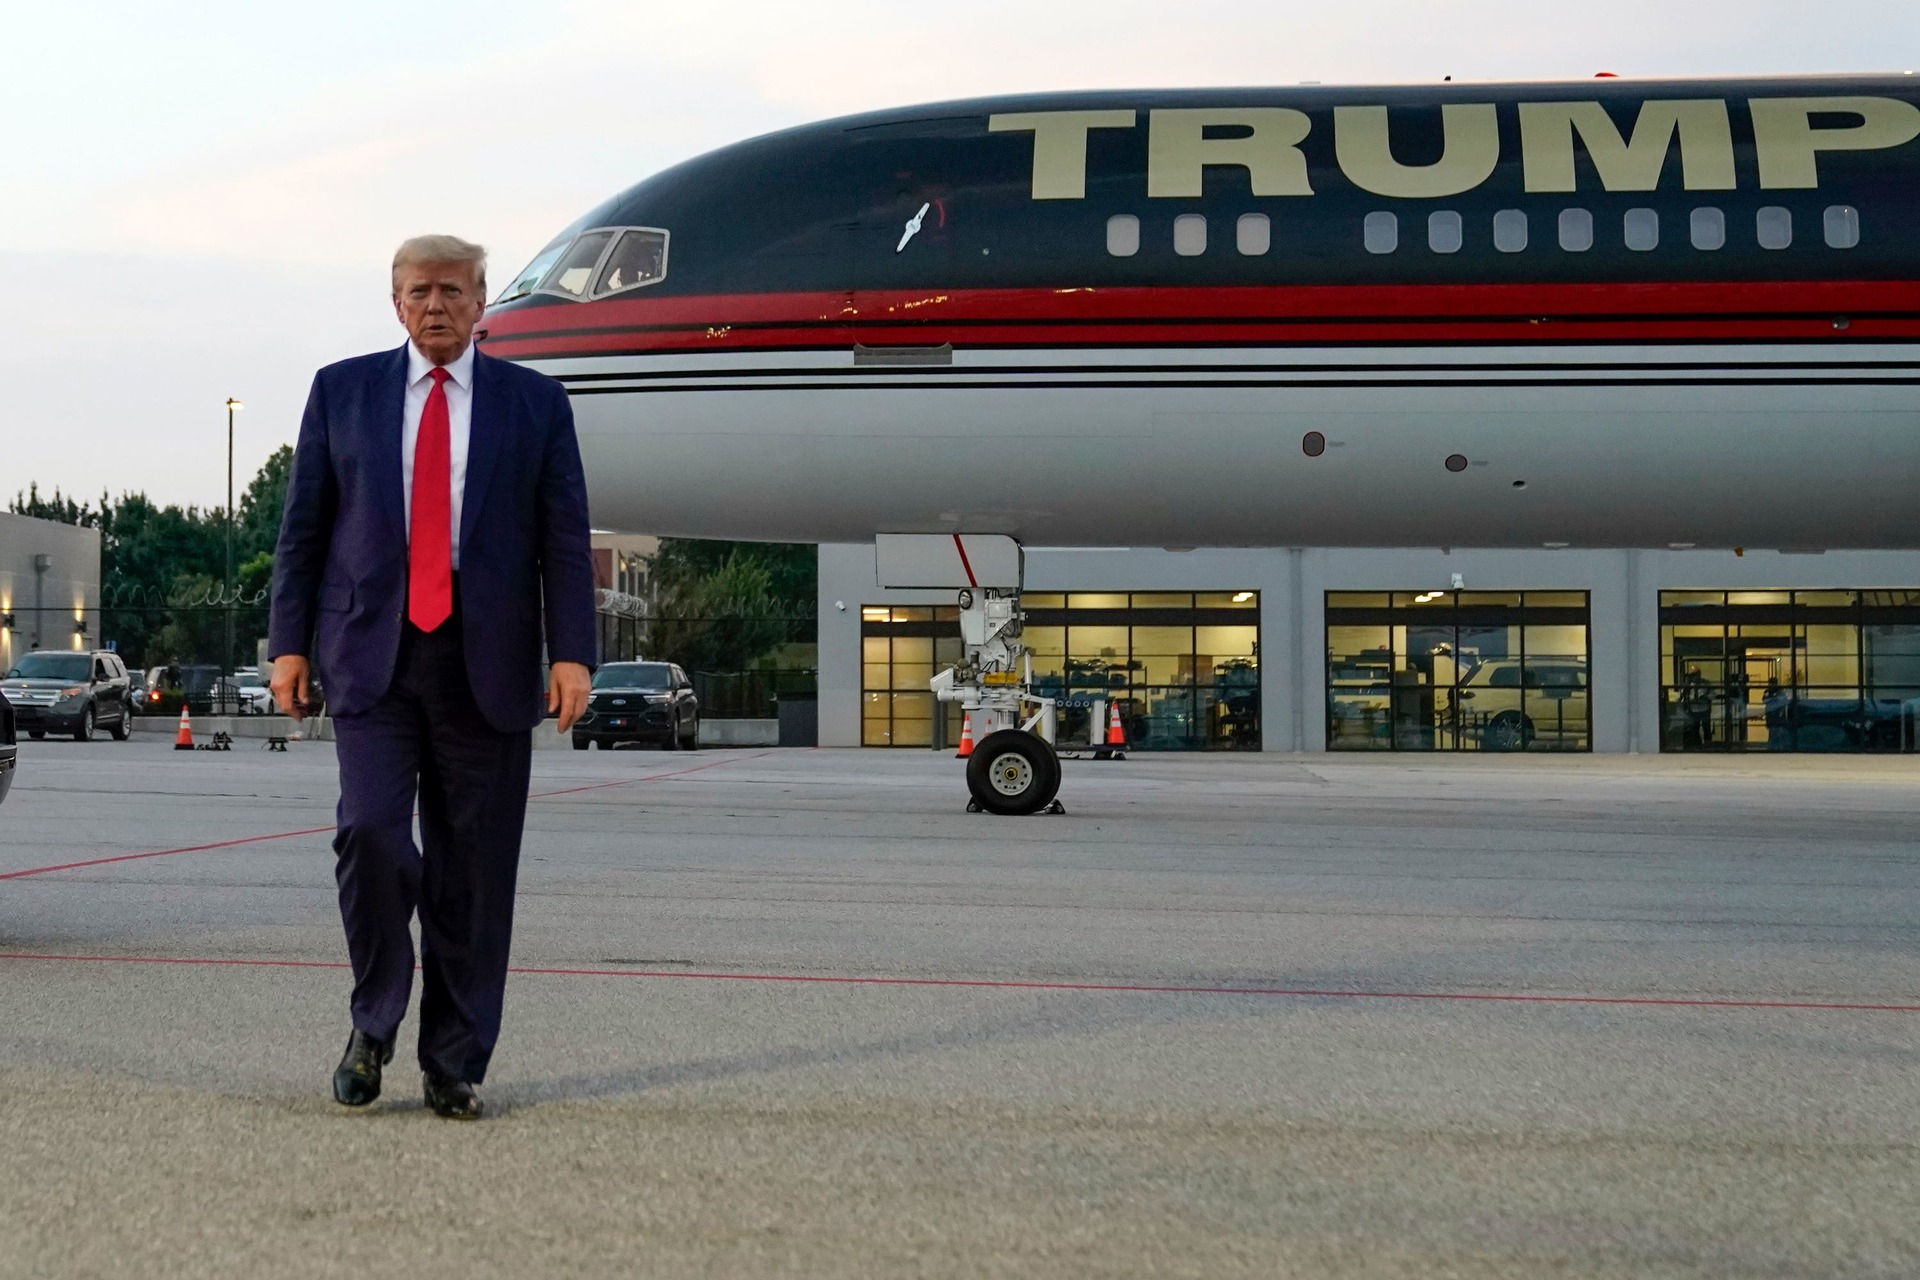 Former president Donald Trump walks over to speak with reporters before departure from Hartsfield-Jackson Atlanta International Airport.